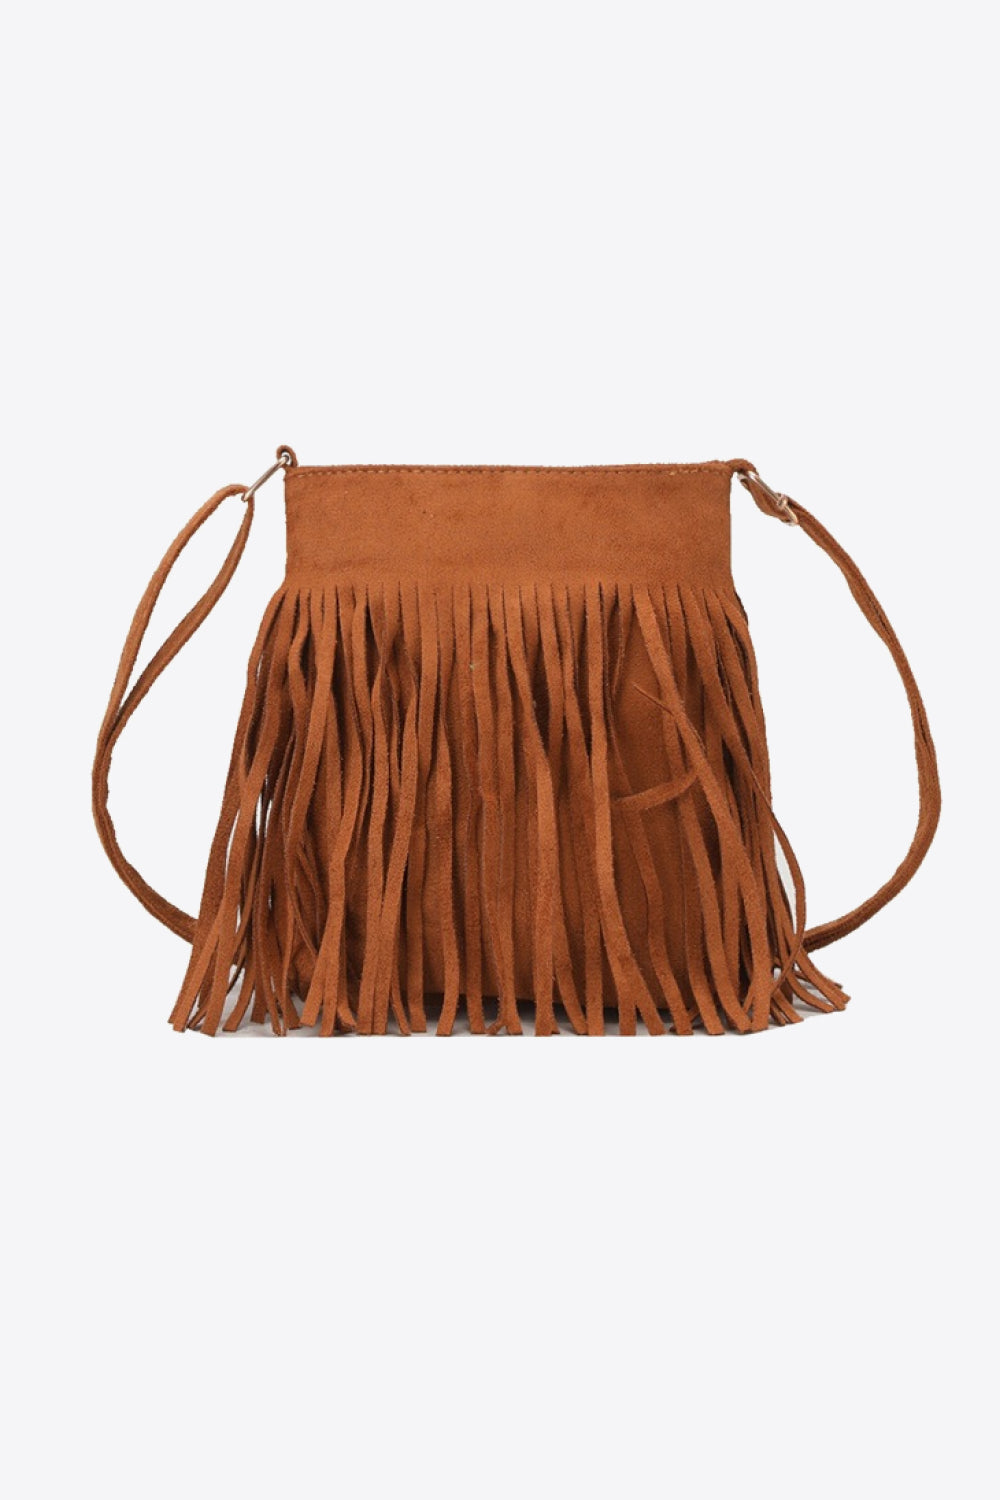 Adored PU Leather Crossbody Bag with Fringe Brown One Size